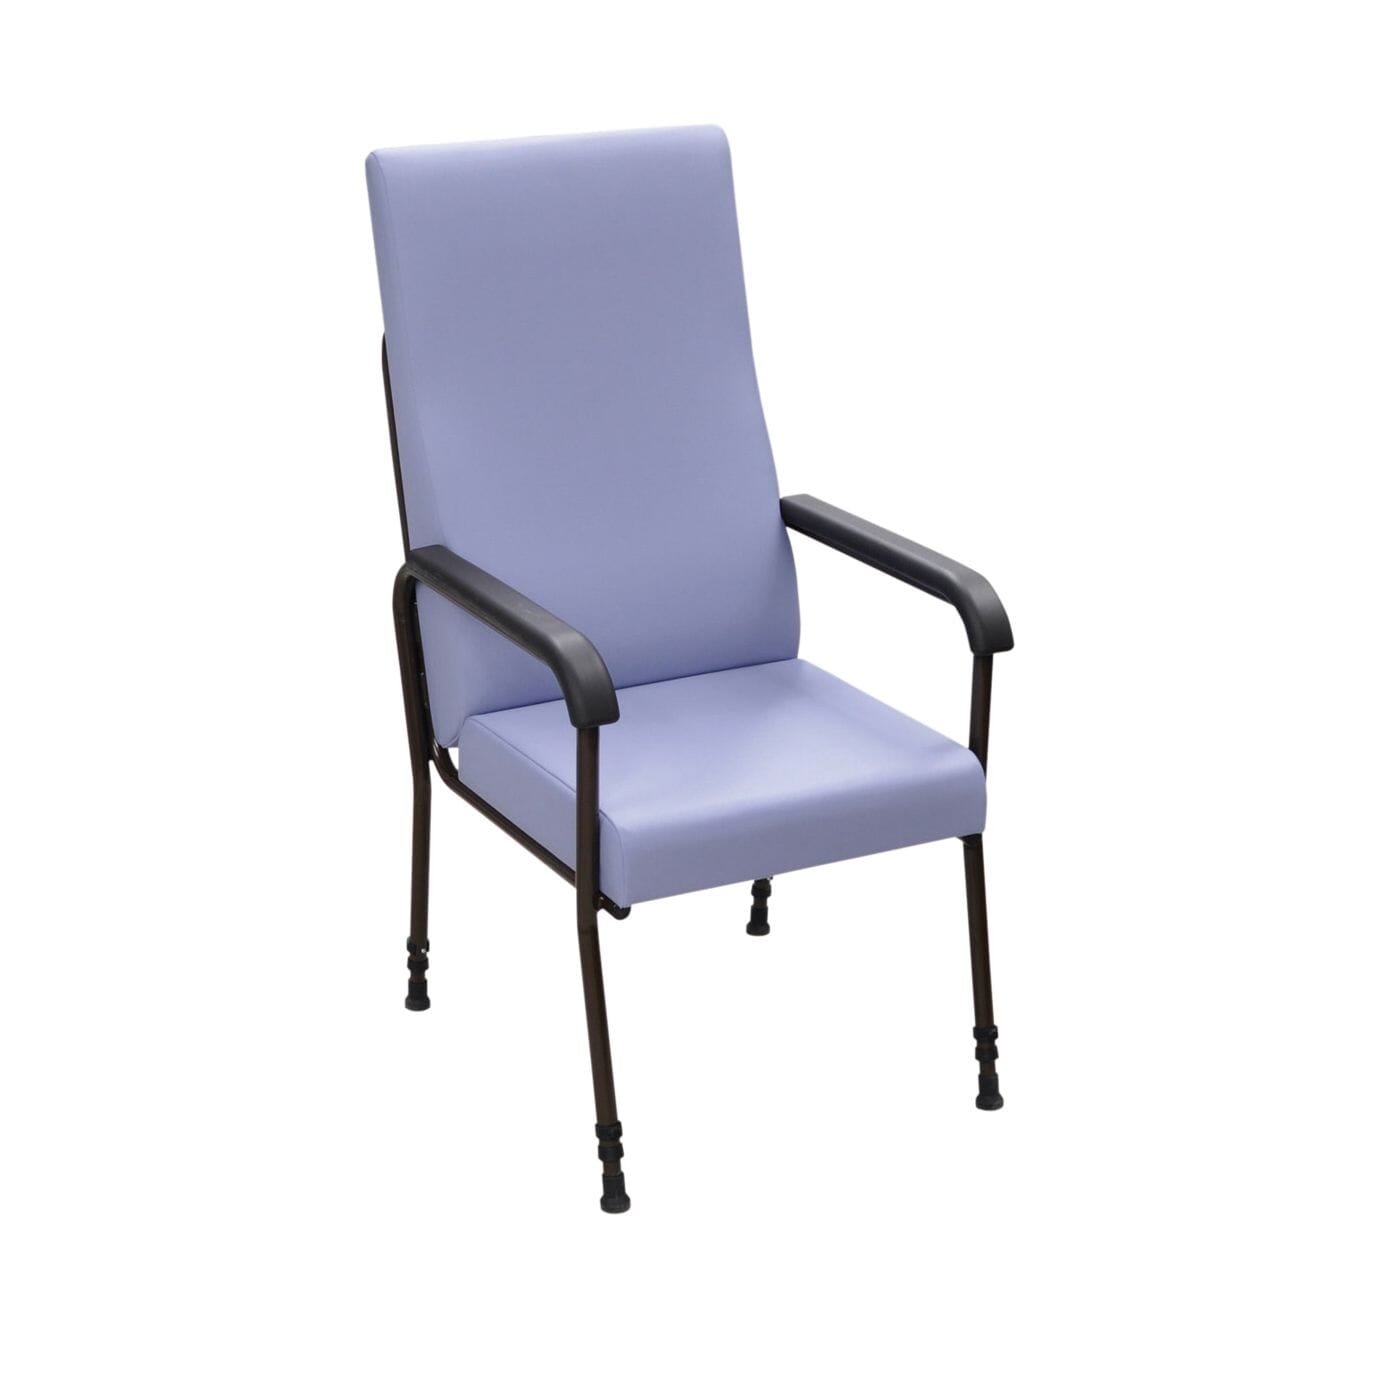 View Longfield Lounge Chair Blue information